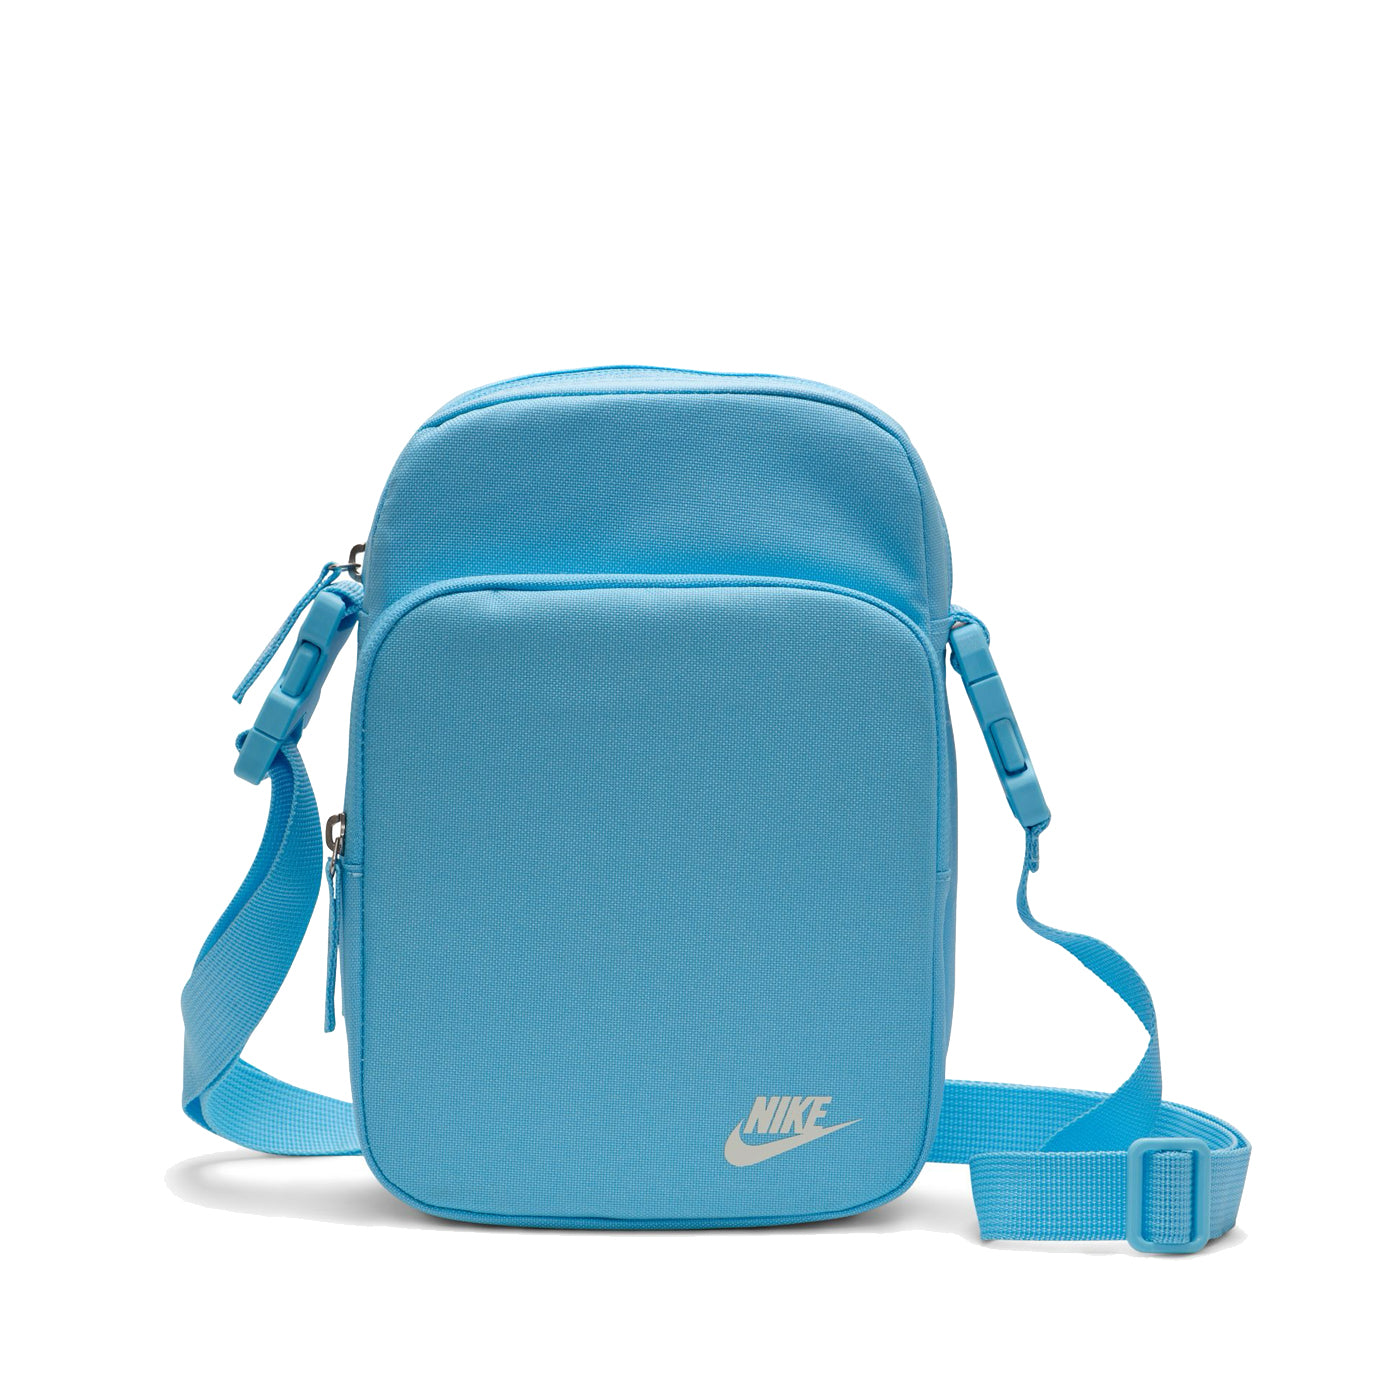 Blue Nike heritage shoulder bag with small white Nike logo on front. Features two separate zipped compartments